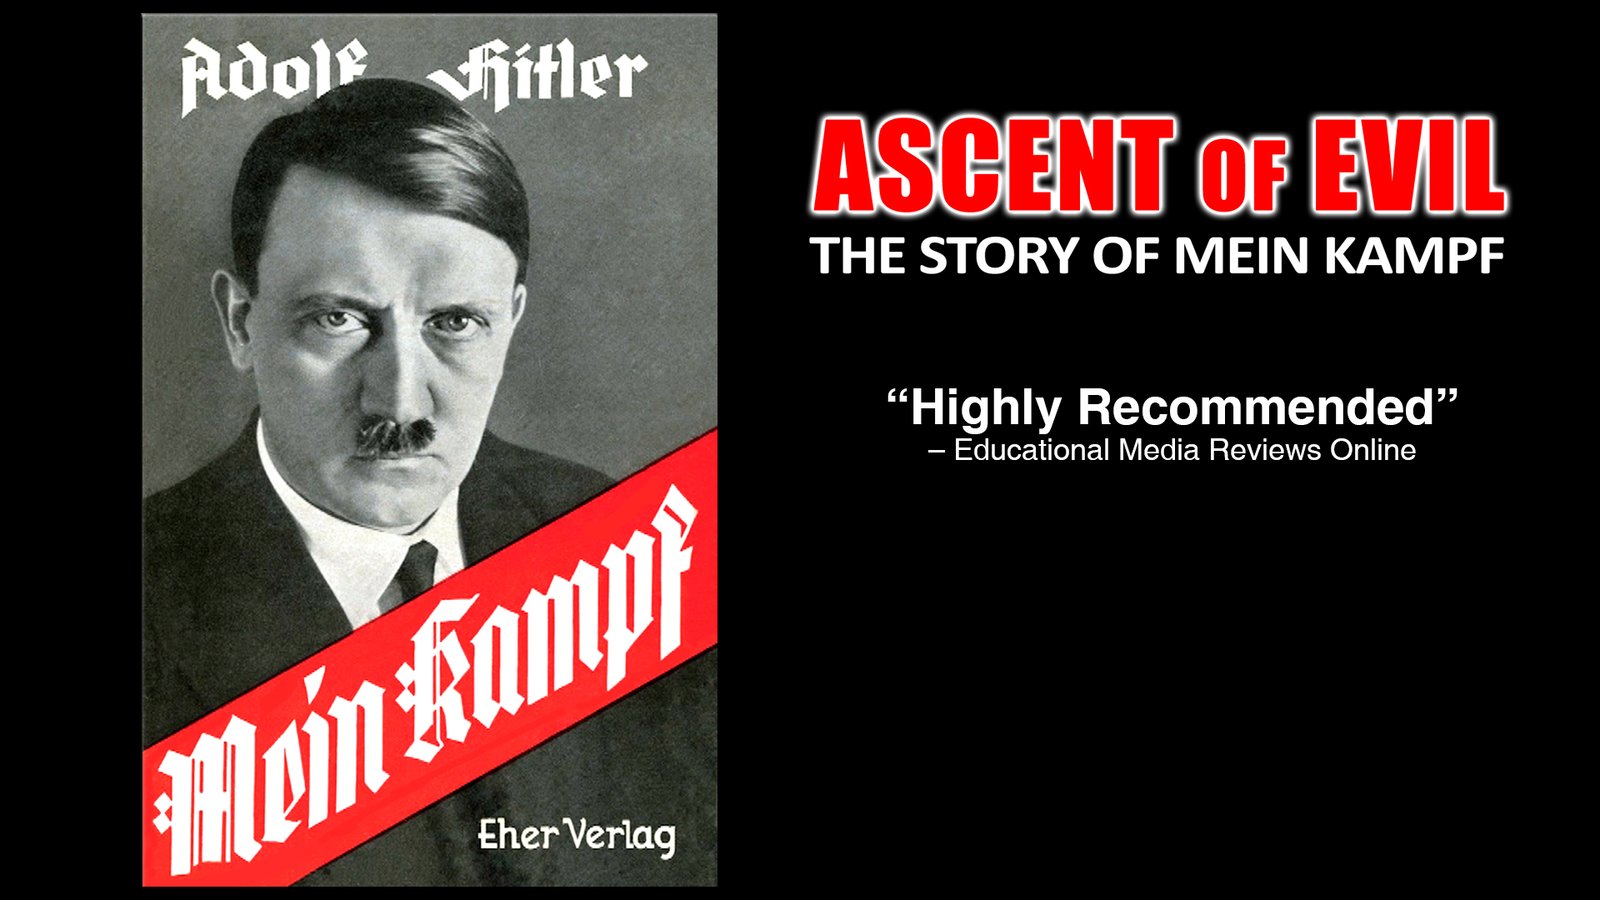 Ascent of Evil - The Story of Mein Kampf